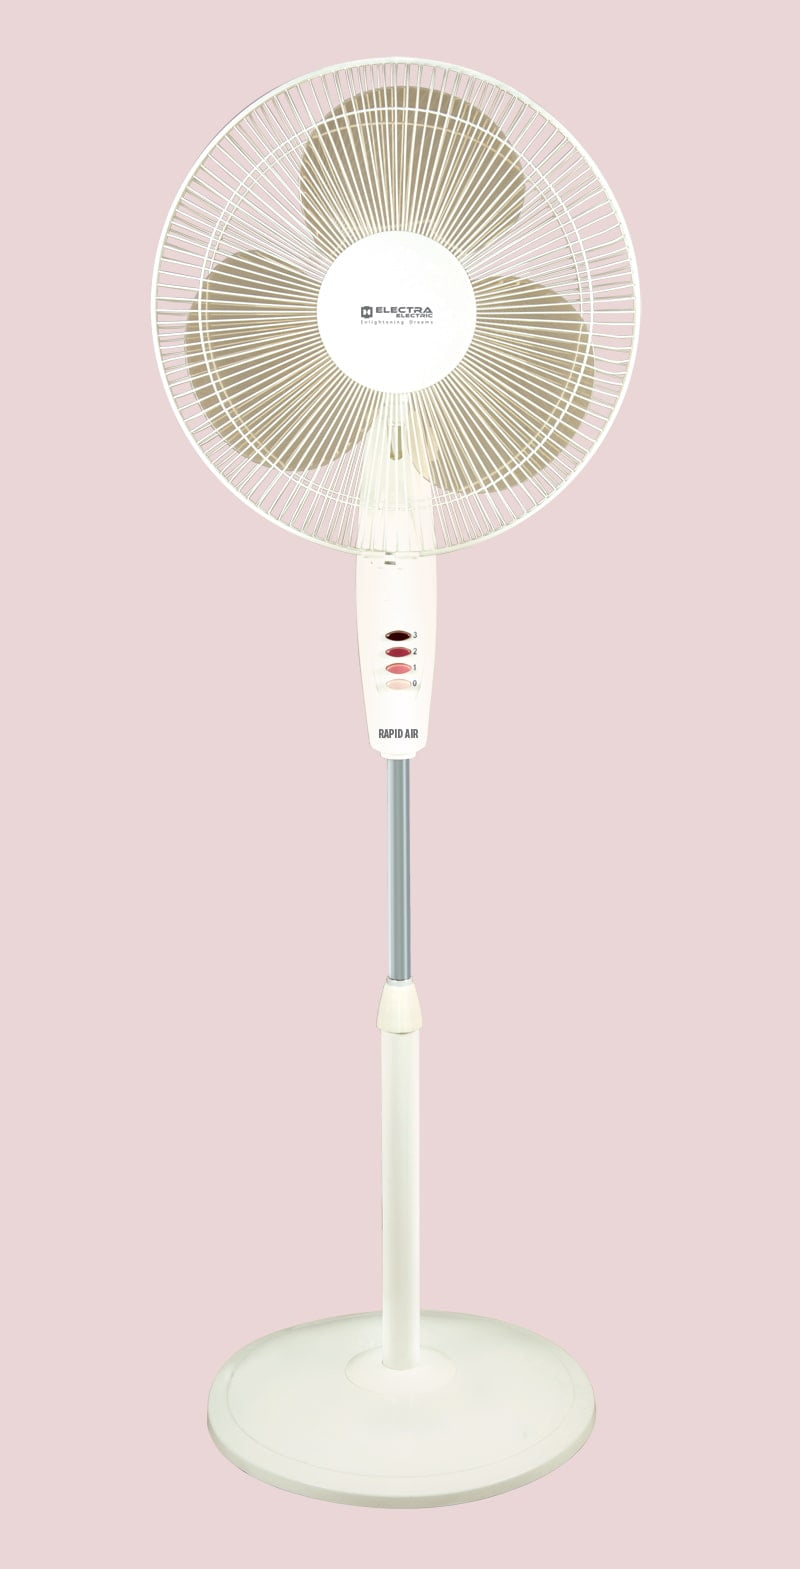 Electra-Electric-Rapid-Air-Pedestal-Fan-product-packaging-design